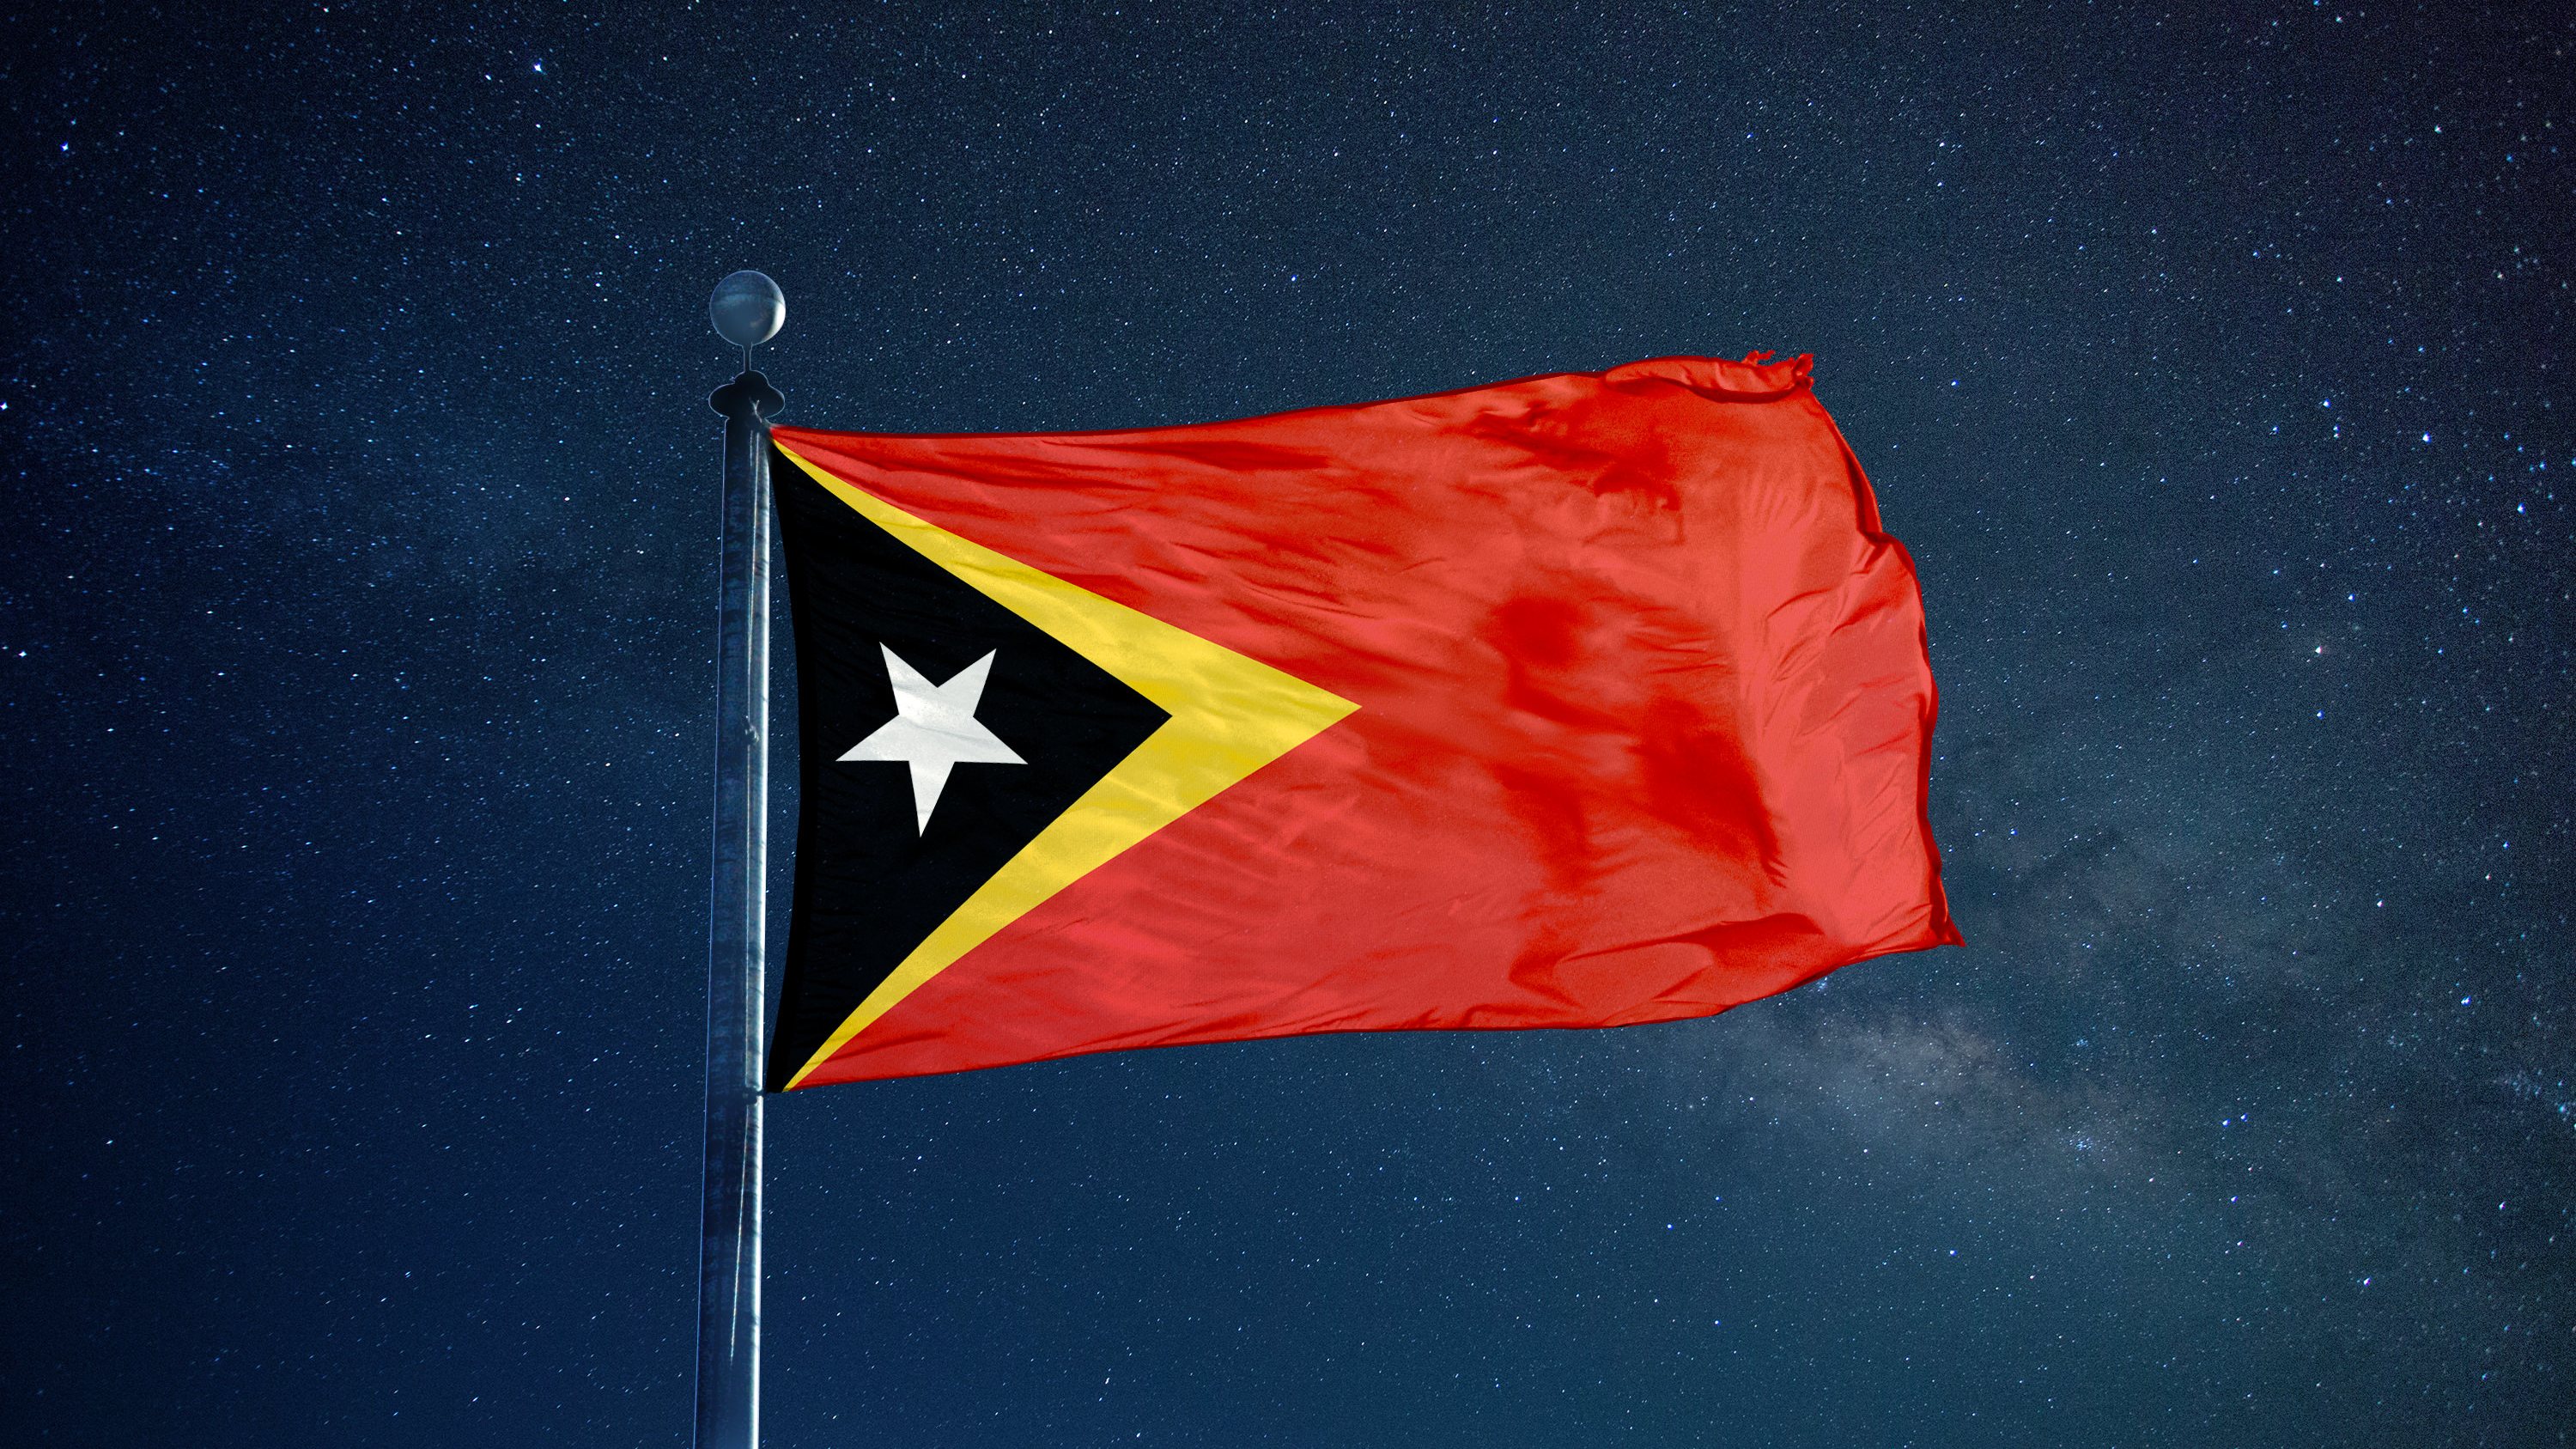 Low Angle View Of East Timor Flag Against Star Field Sky